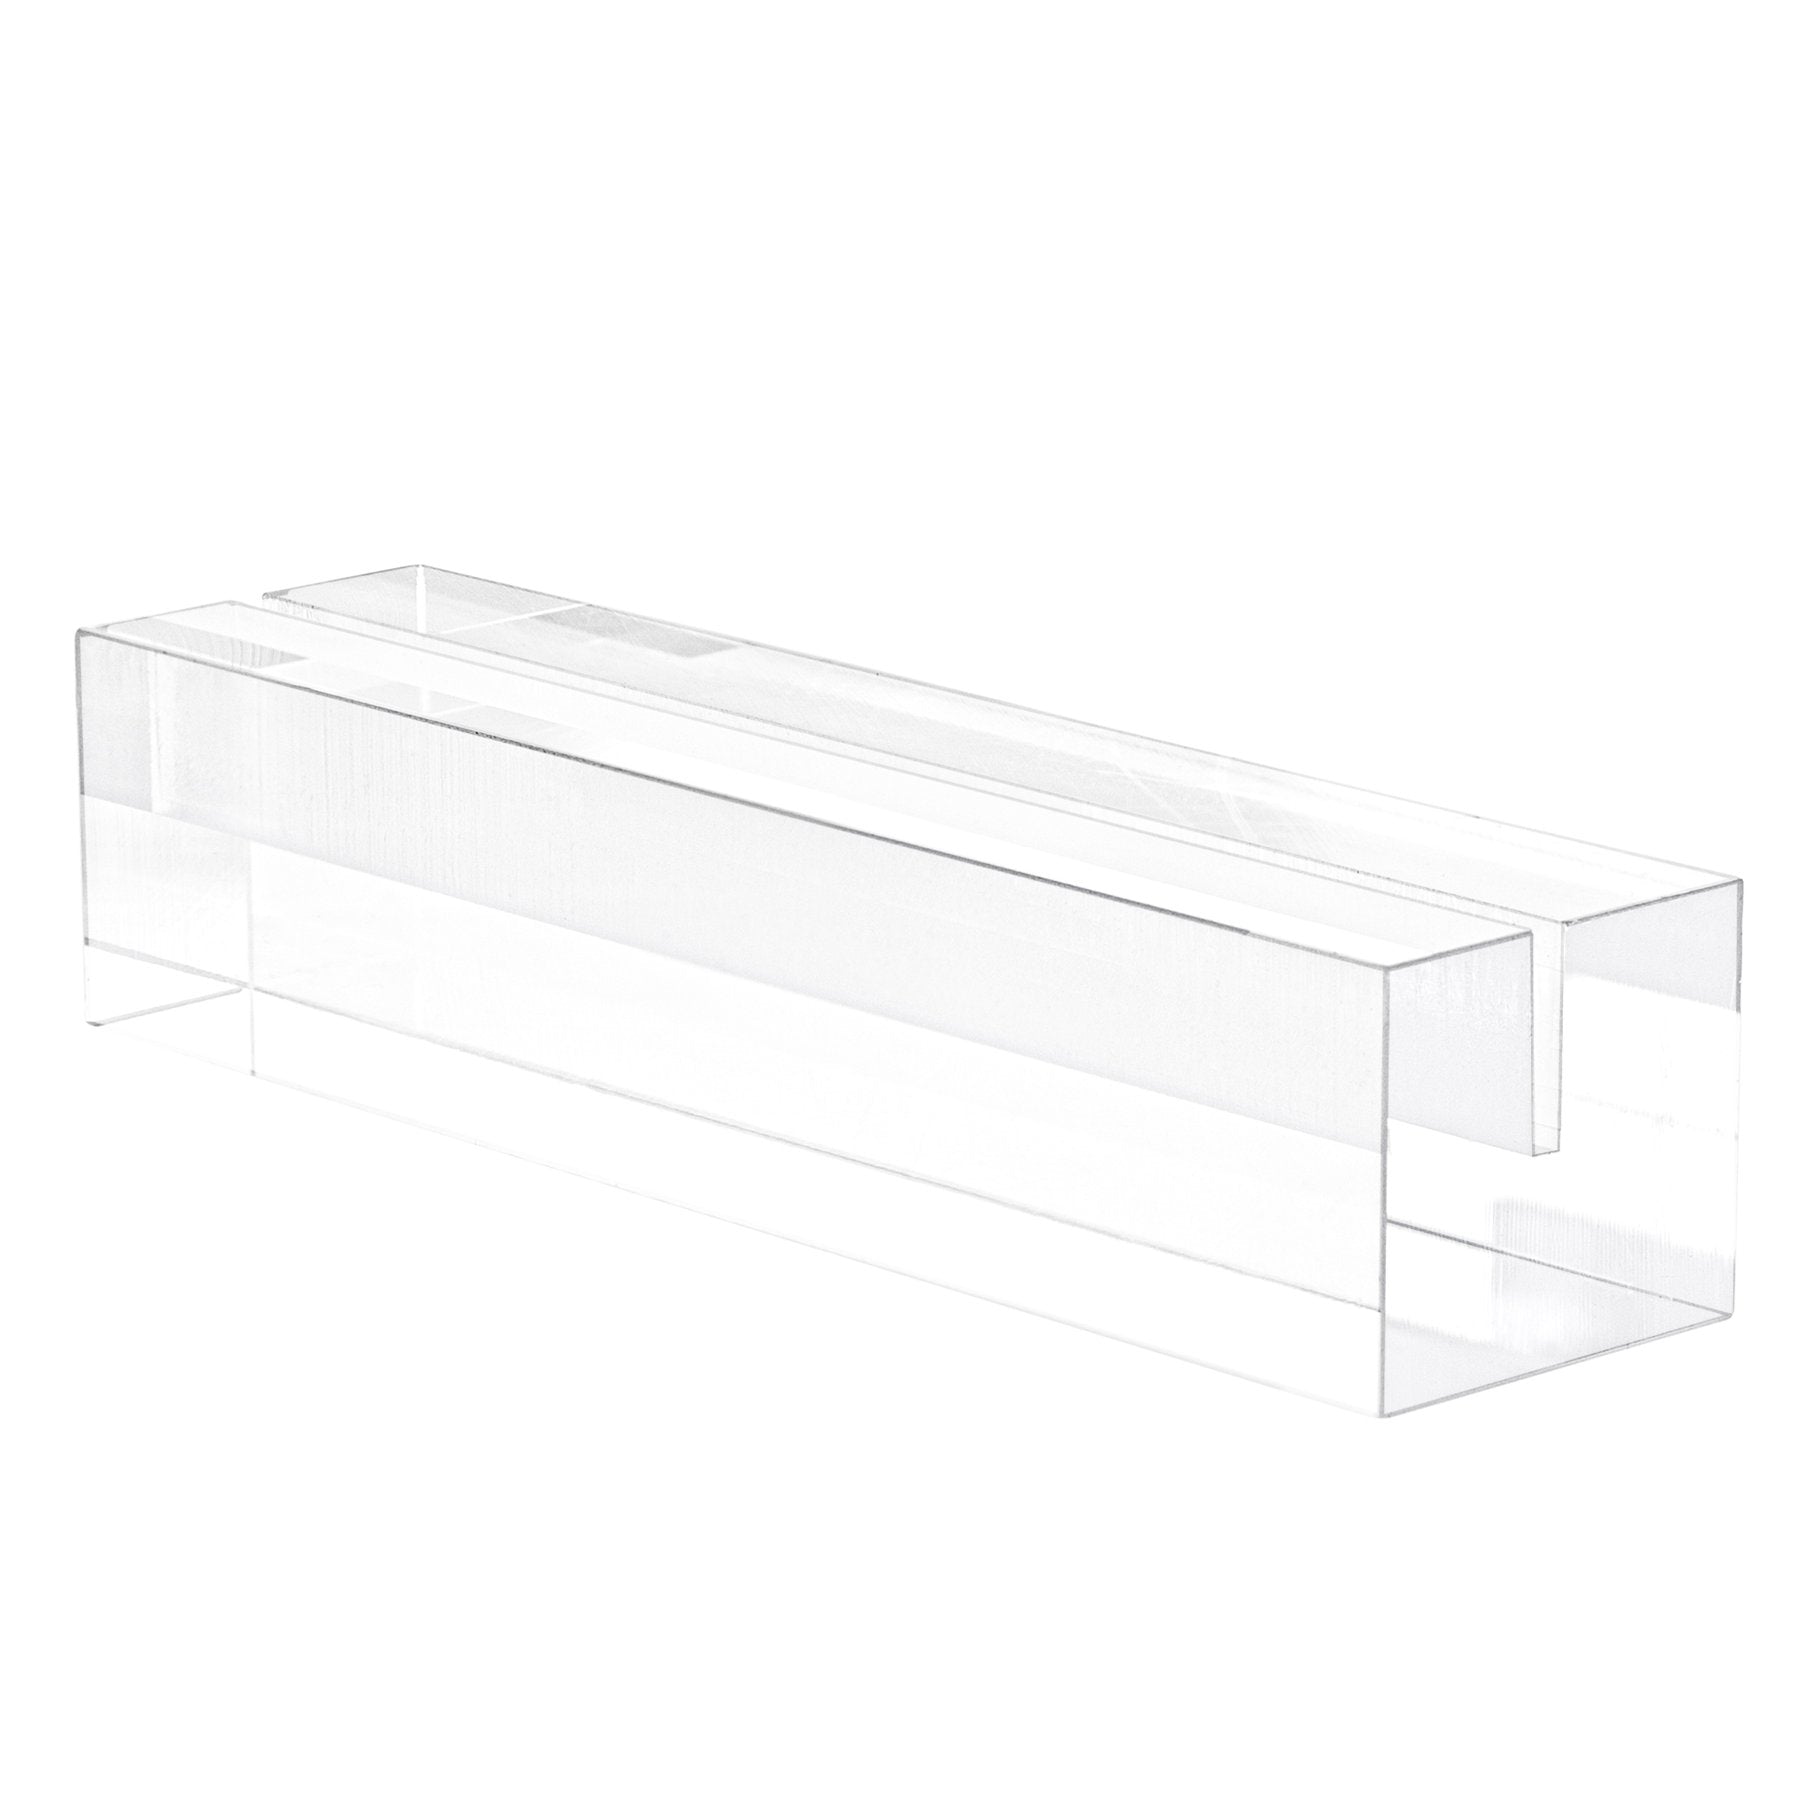 Lucite Card Stand for Bracha cards